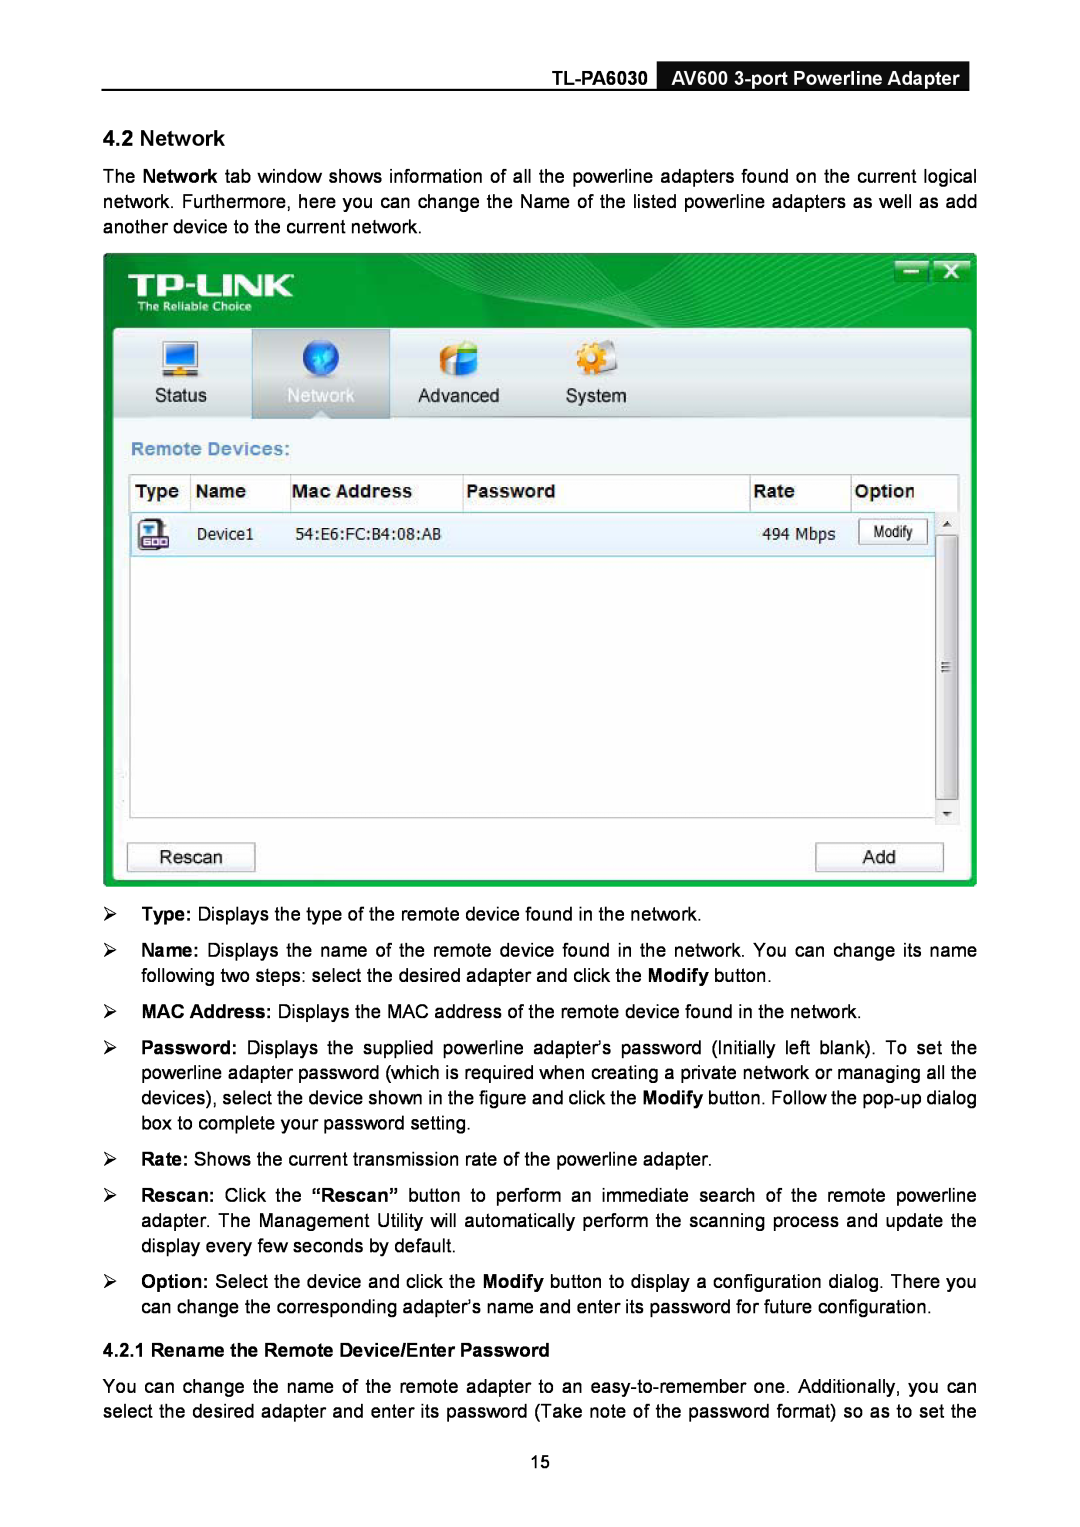 TP-Link manual Network, TL-PA6030 AV600 3-port Powerline Adapter, Rename the Remote Device/Enter Password 